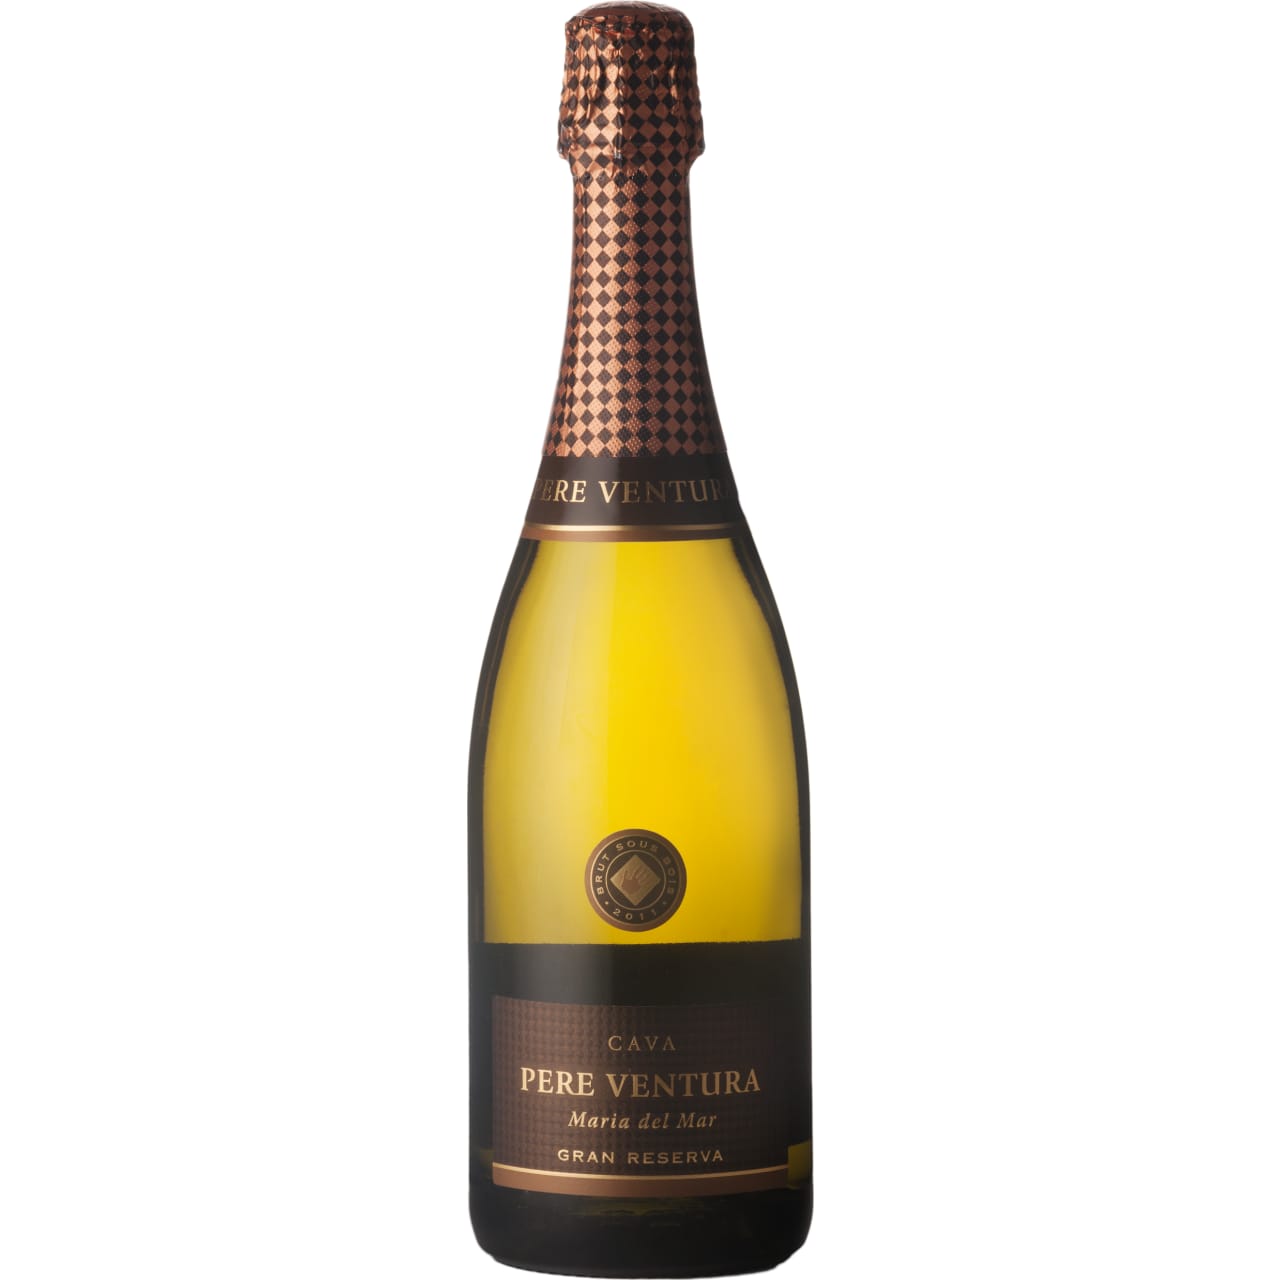 A complex and structured sparkling wine, aged for an extended period of 36 months minimum.